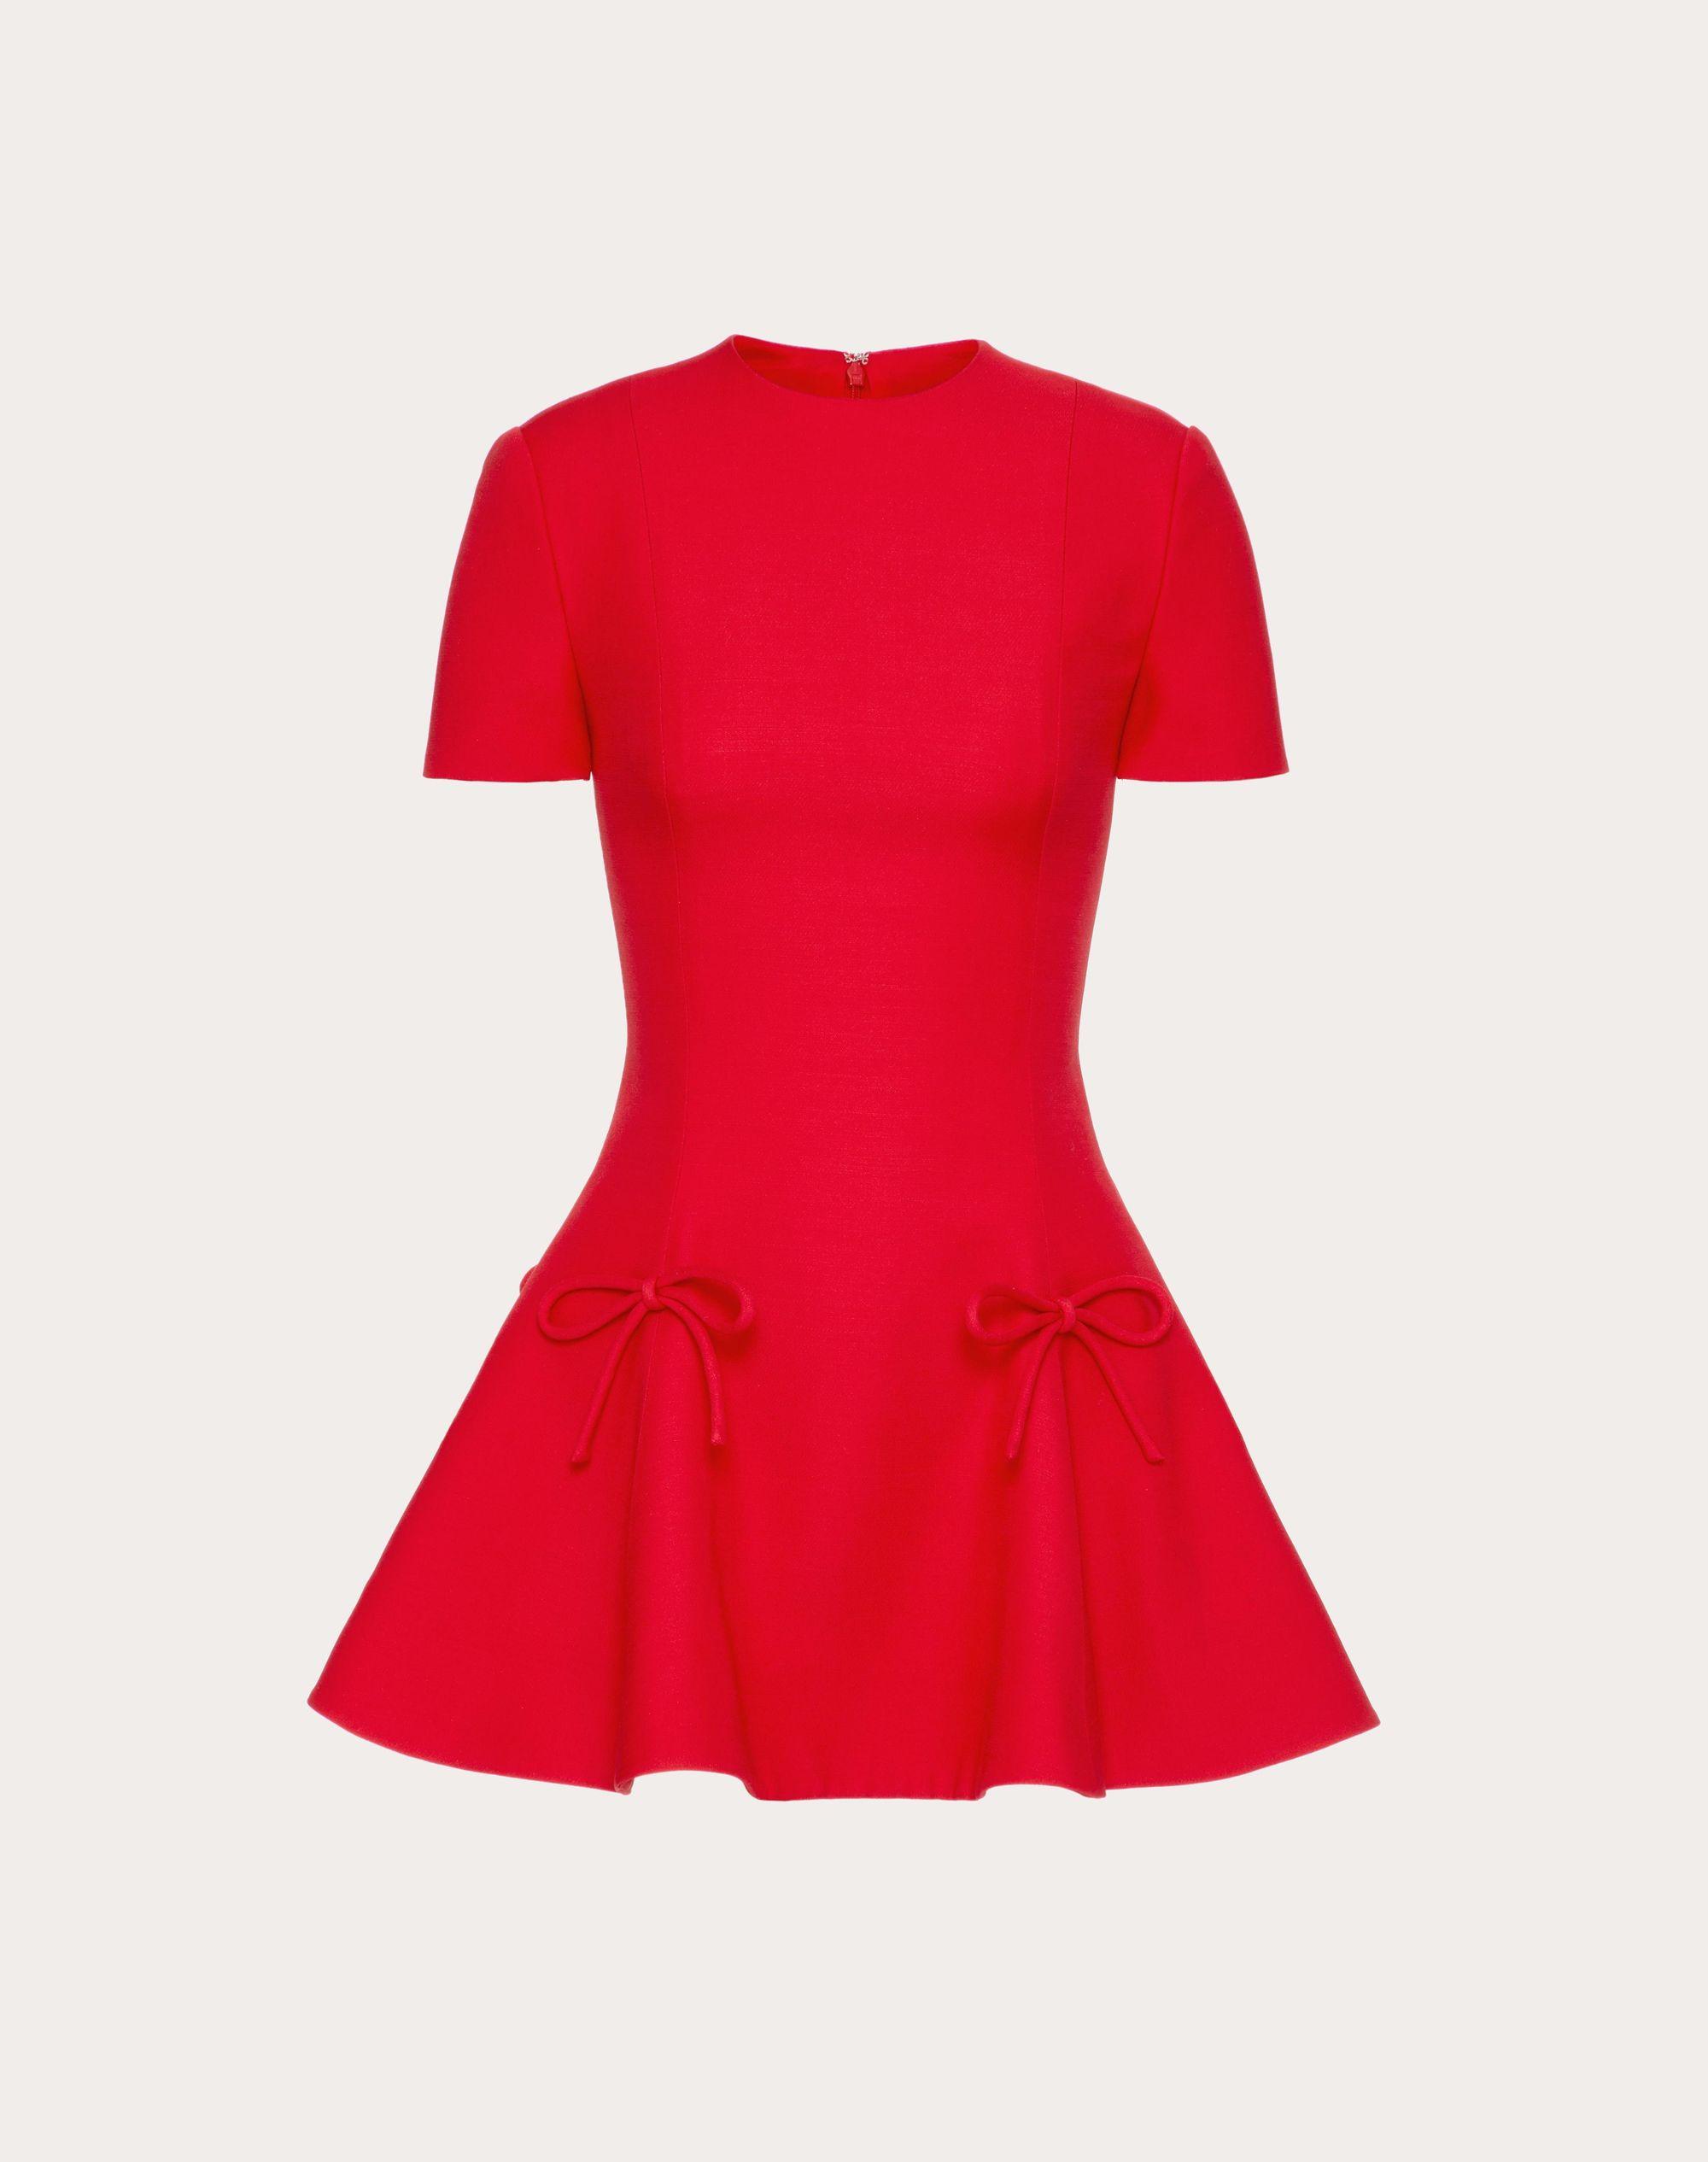 Valentino Crepe Dress in Red |